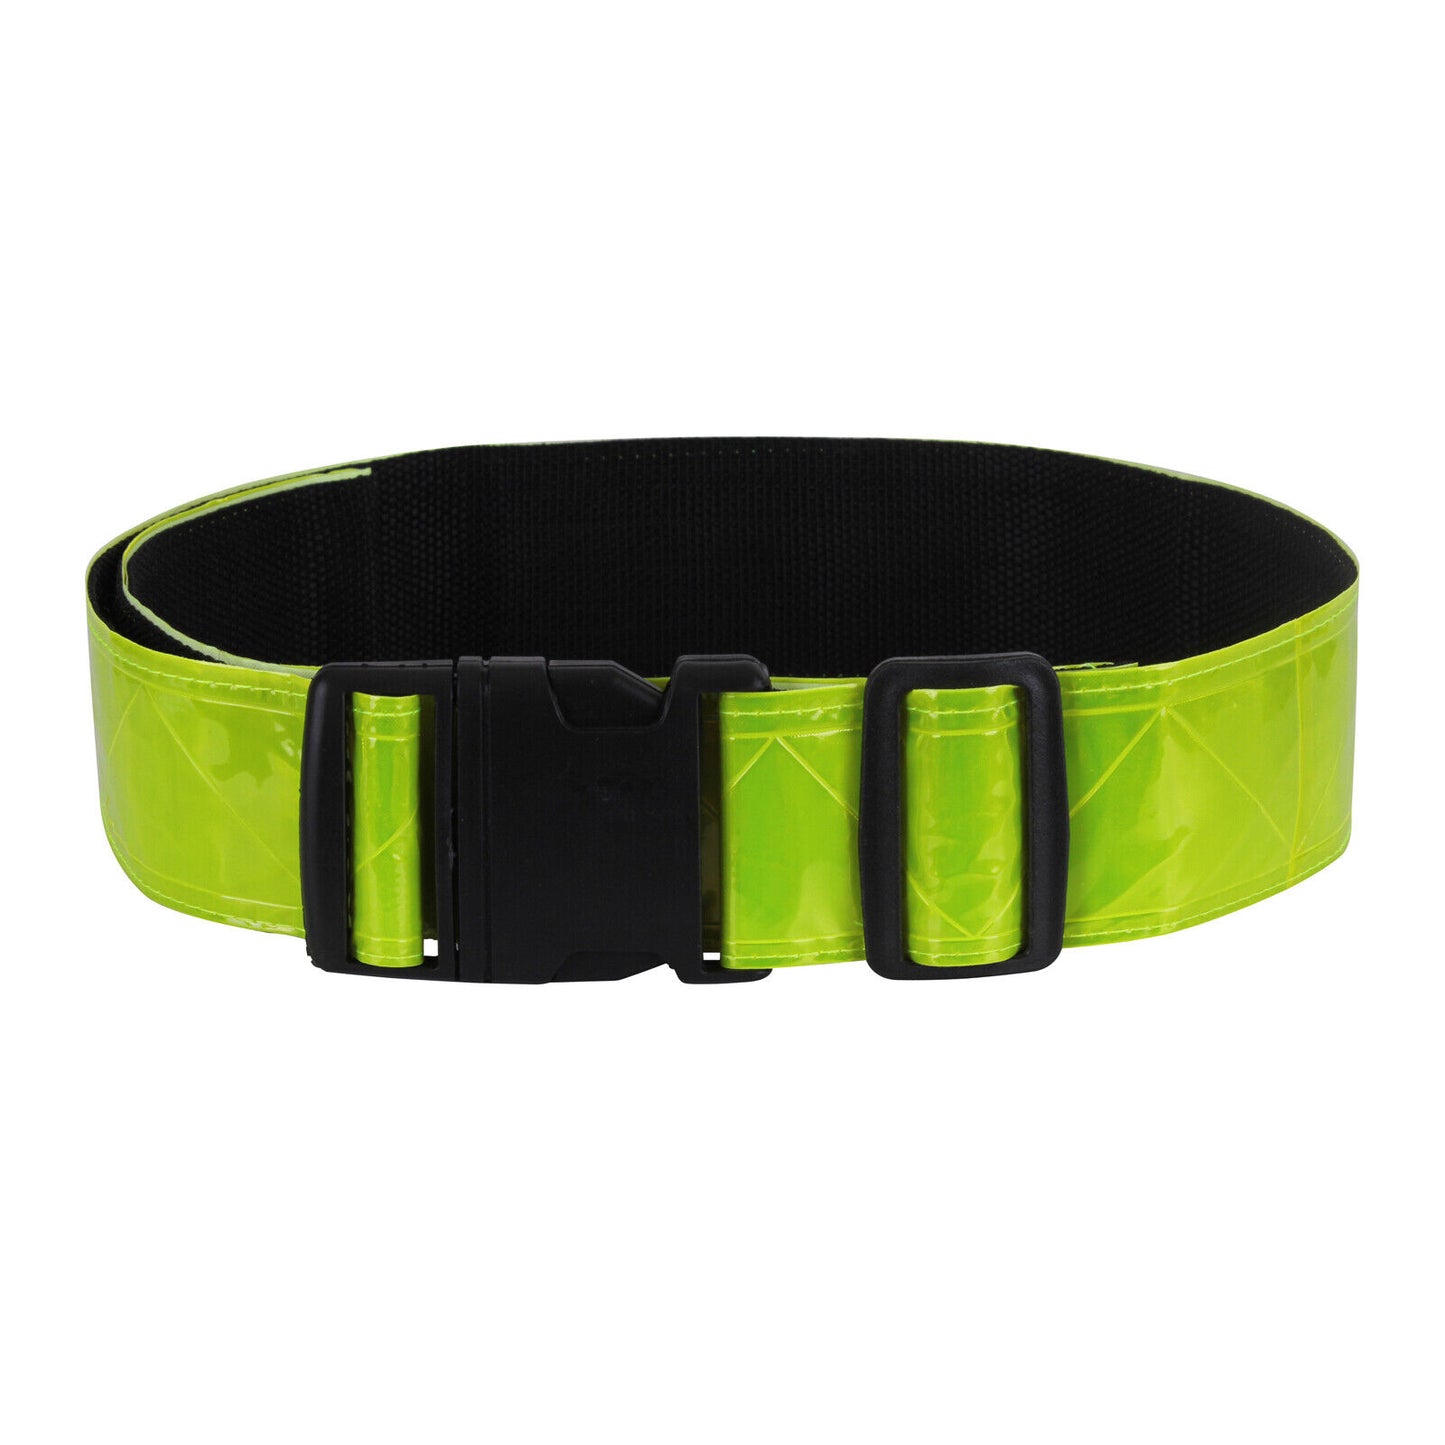 Army Style Reflective Physical Training Belt in Blue or Safety Green